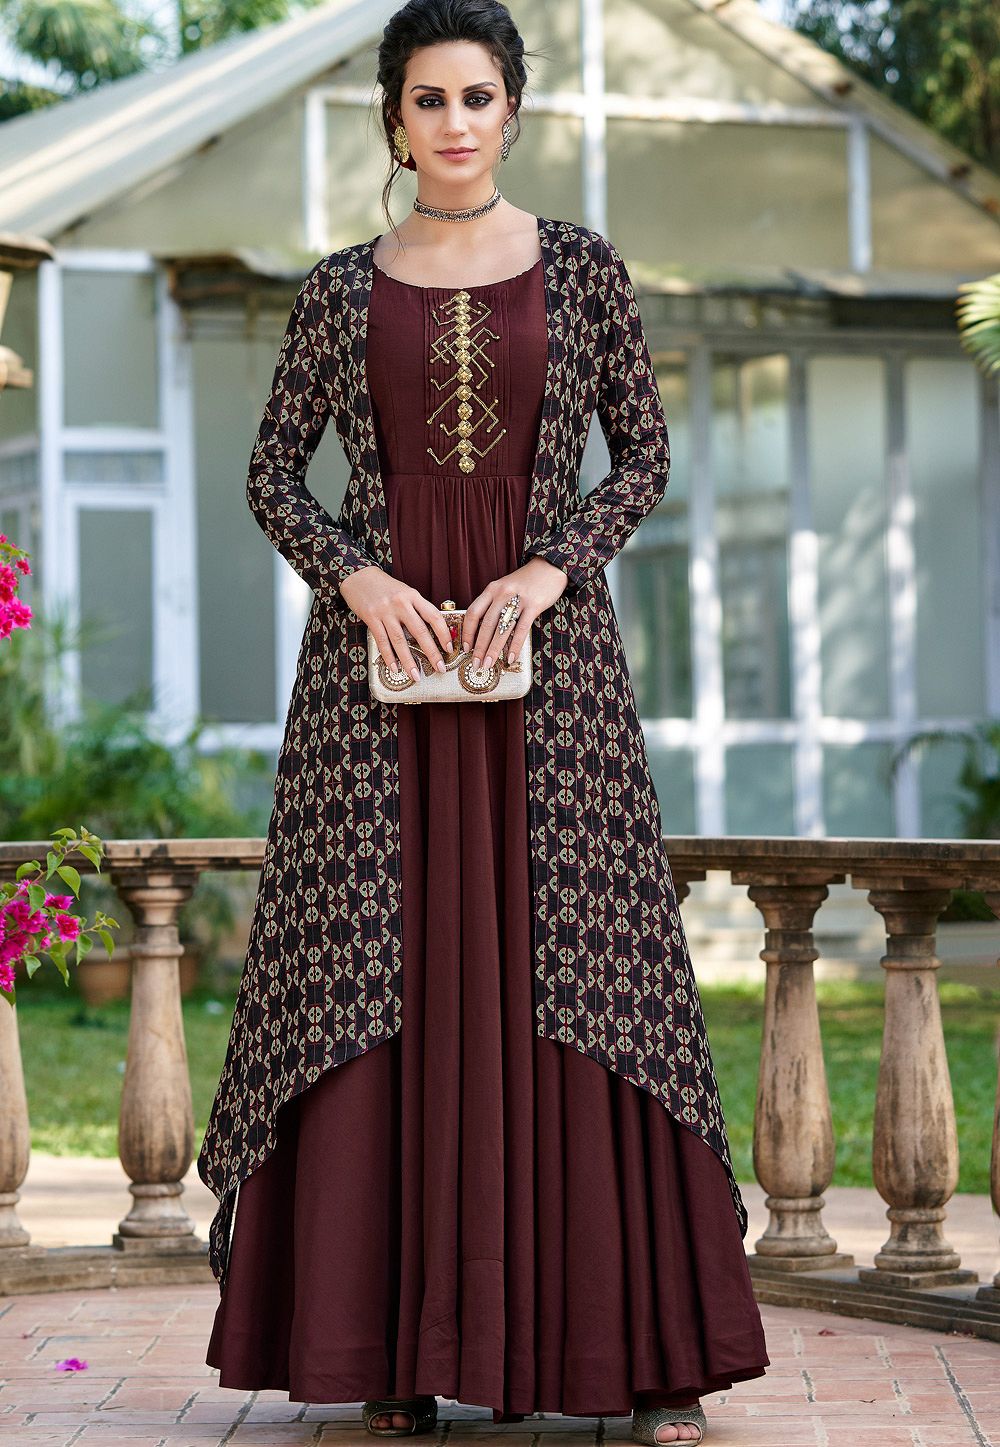 Shop Long Ethnic Dresses For Women With The Best Prices – Page 2